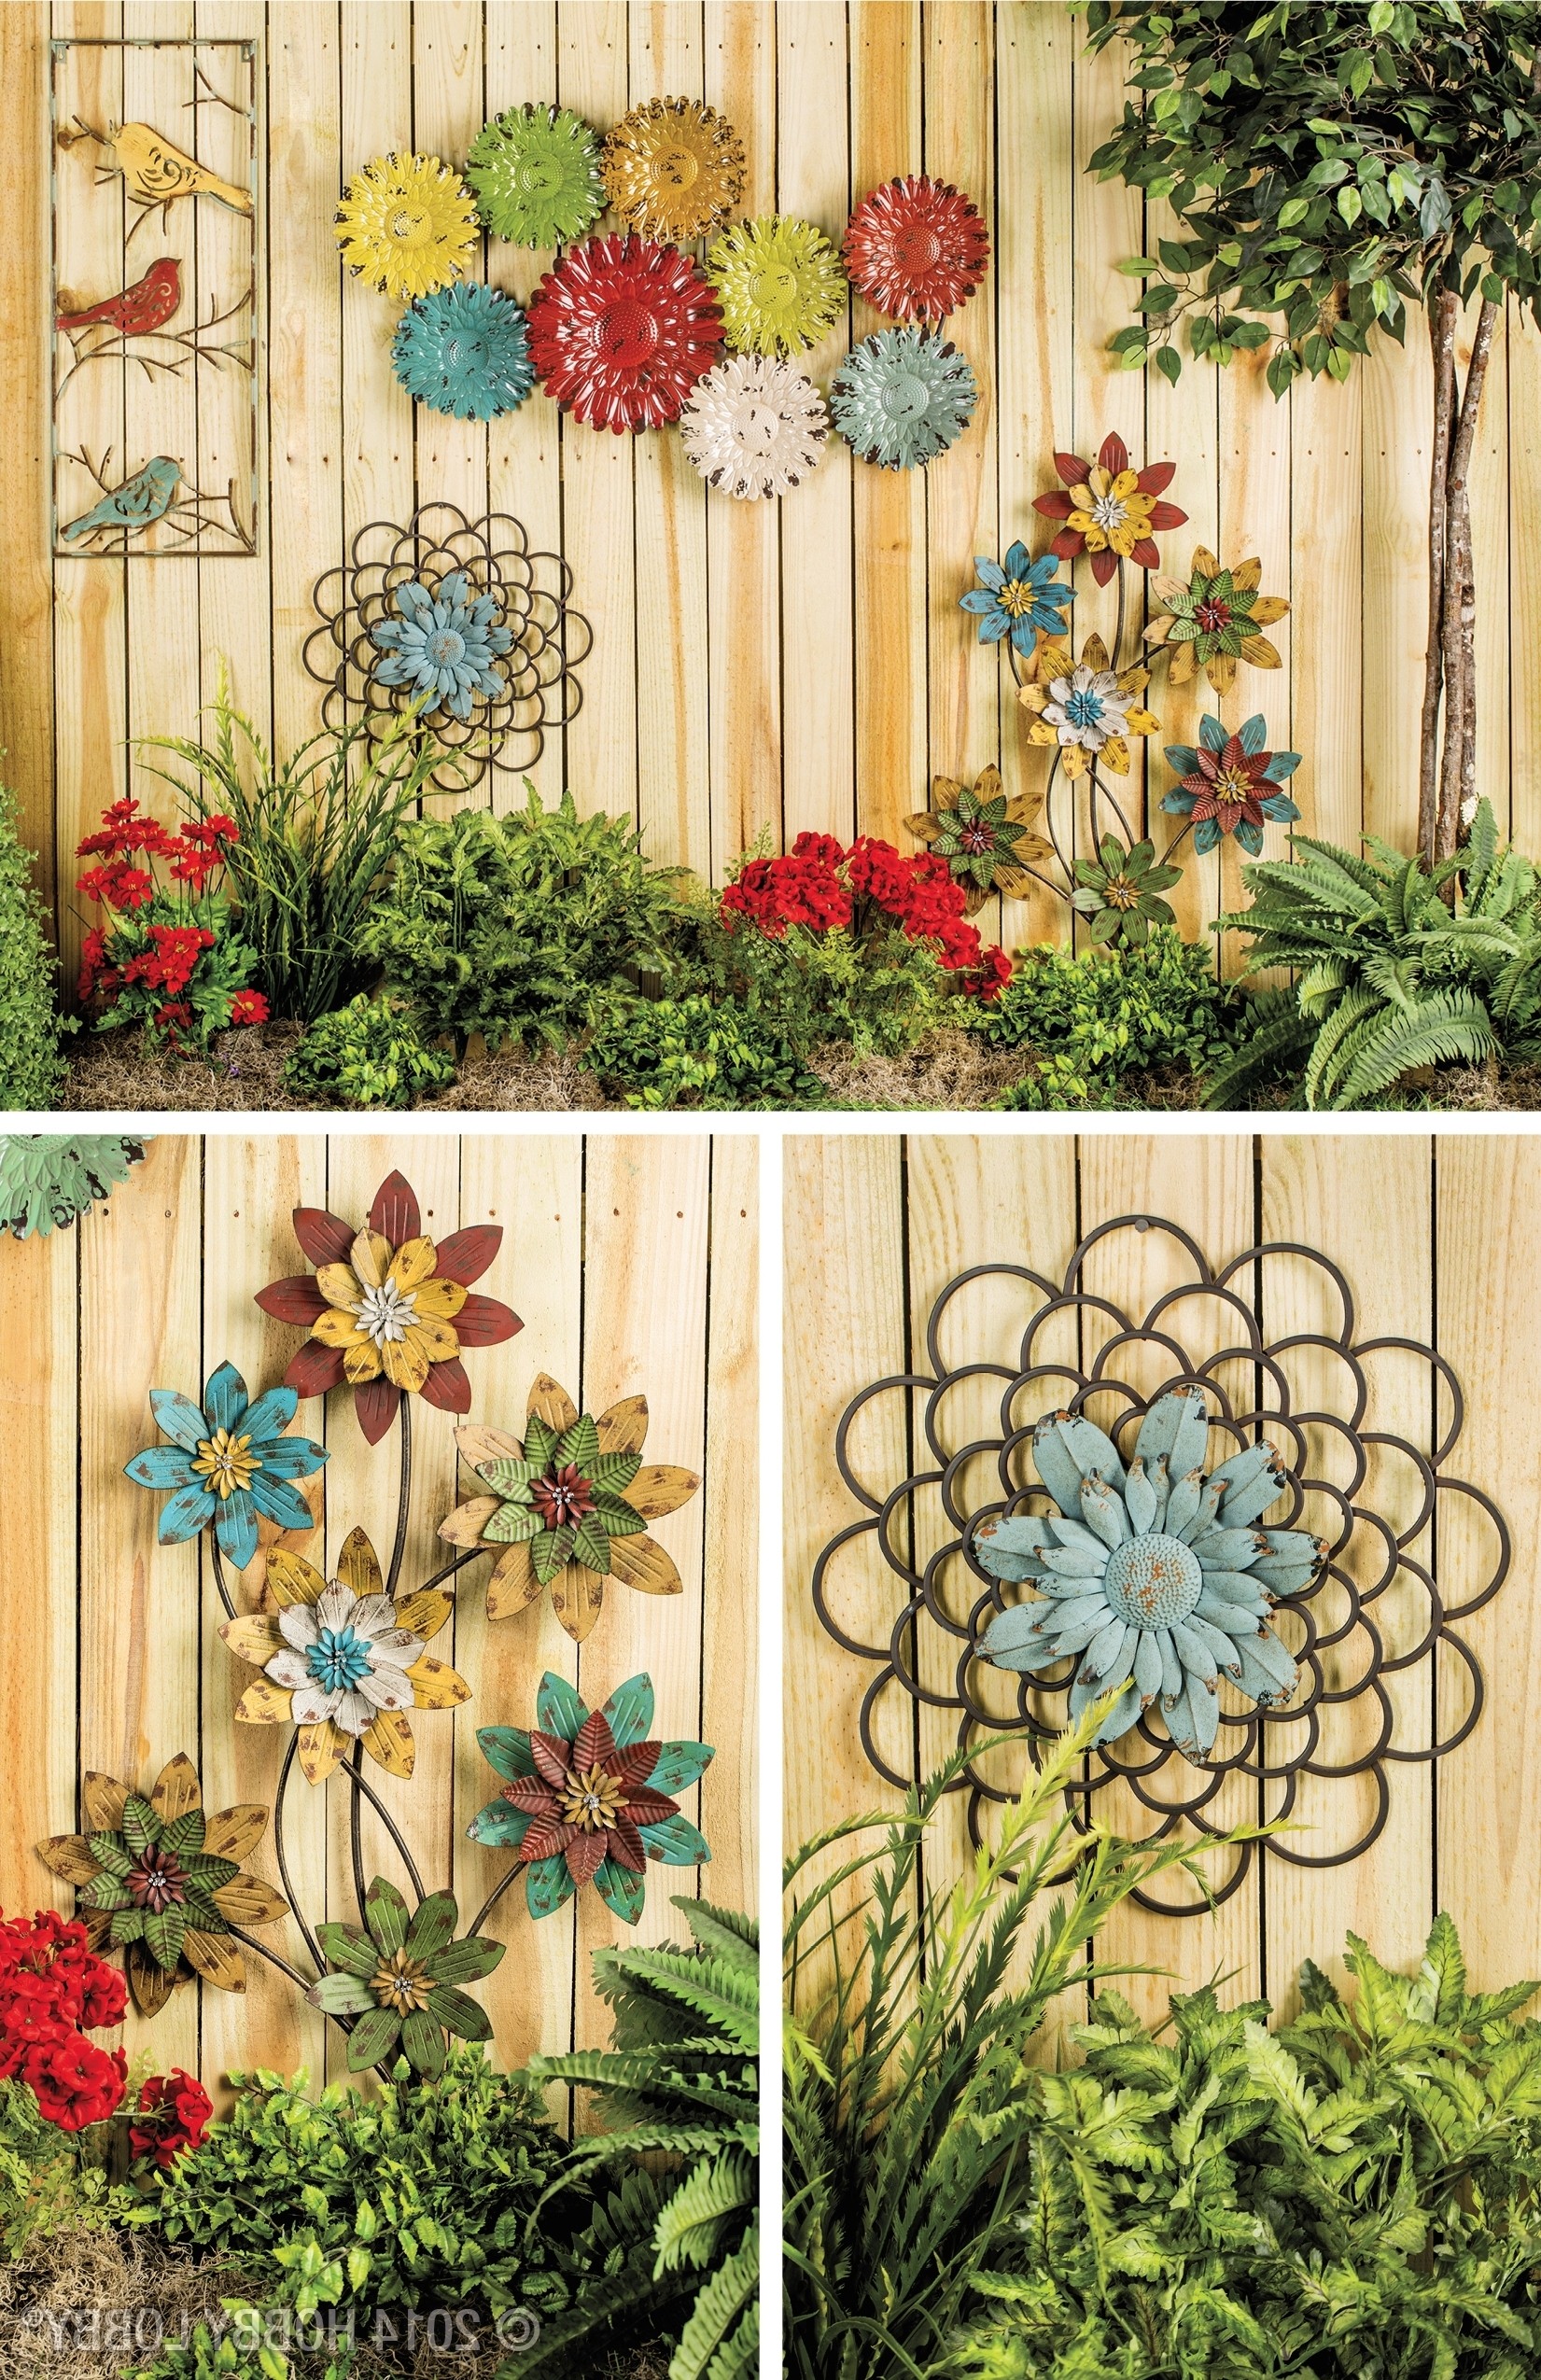 Exterior Wall Decor: A Touch Of Colorful Beauty